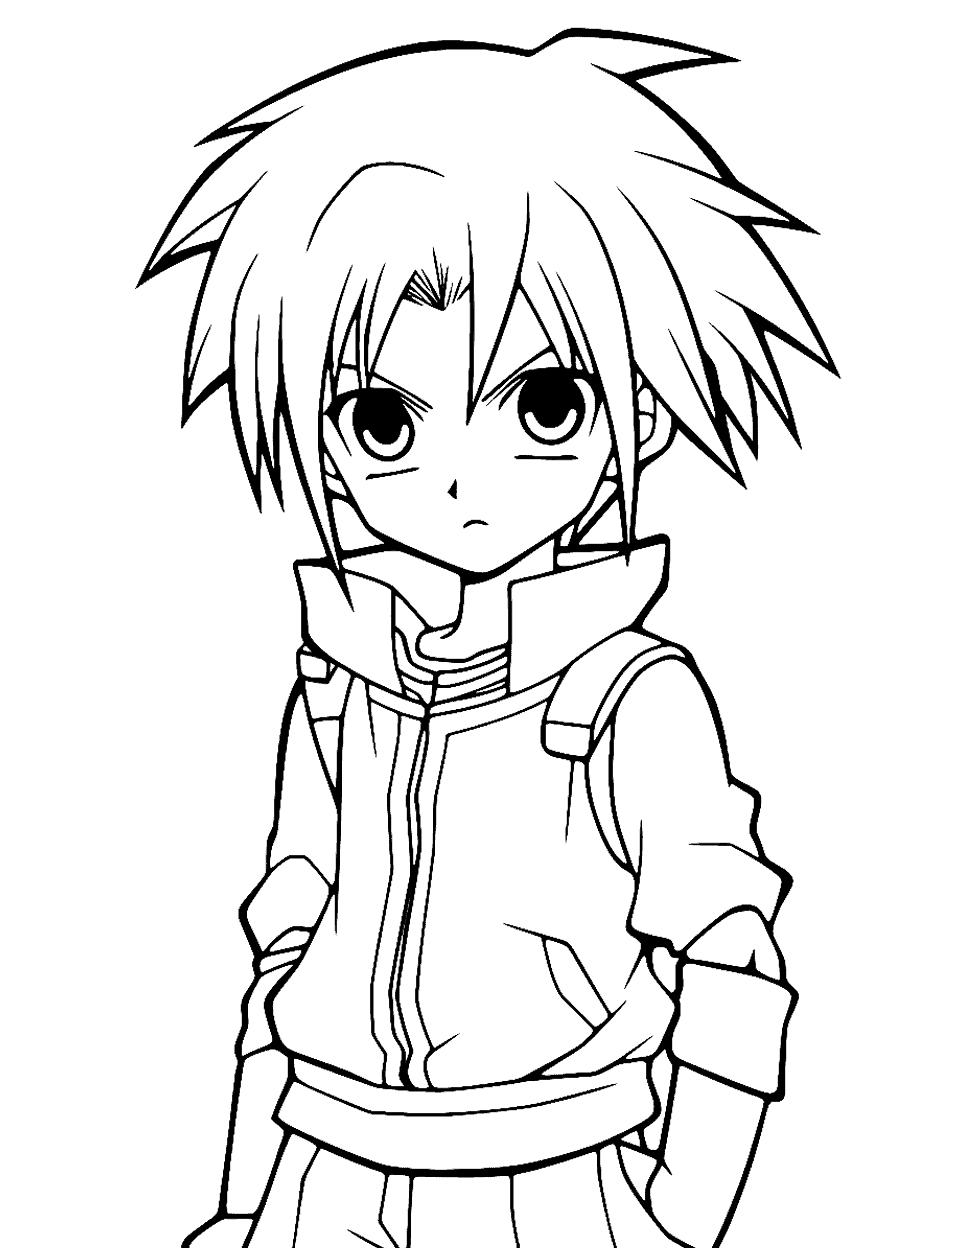 Emo Anime Boy Coloring Page - A coloring page of an emo anime boy, expressing deep emotions, with his signature dark and sleek hairstyle.